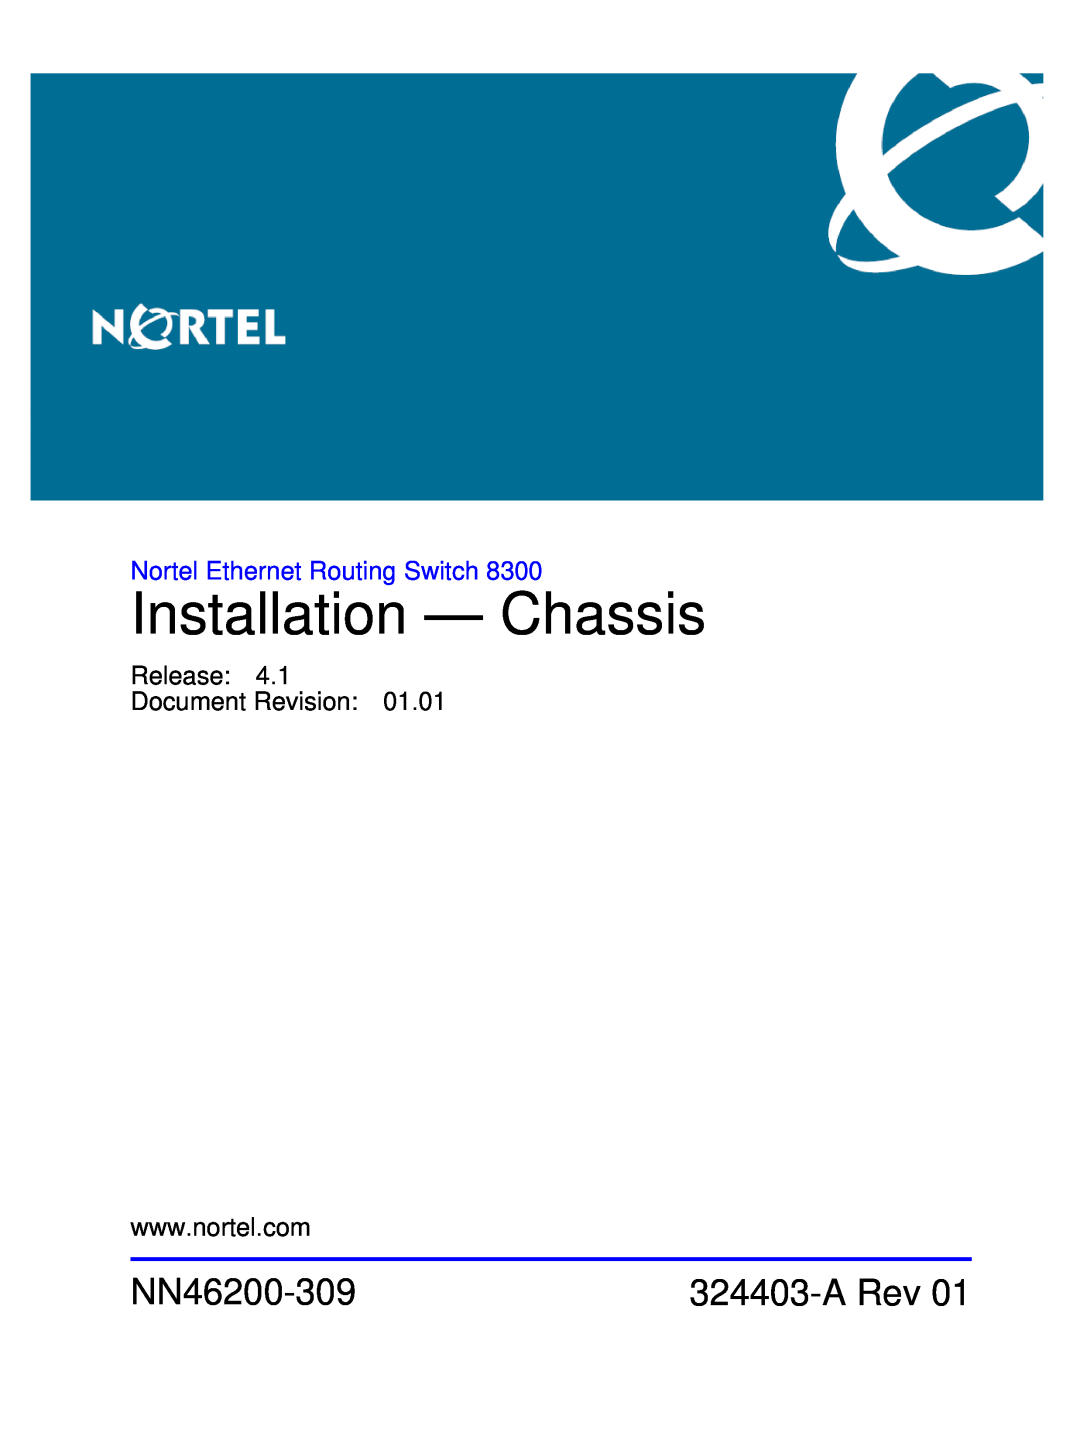 Nortel Networks 8306, 8310 manual Installation - Chassis, NN46200-309, A Rev, Nortel Ethernet Routing Switch 